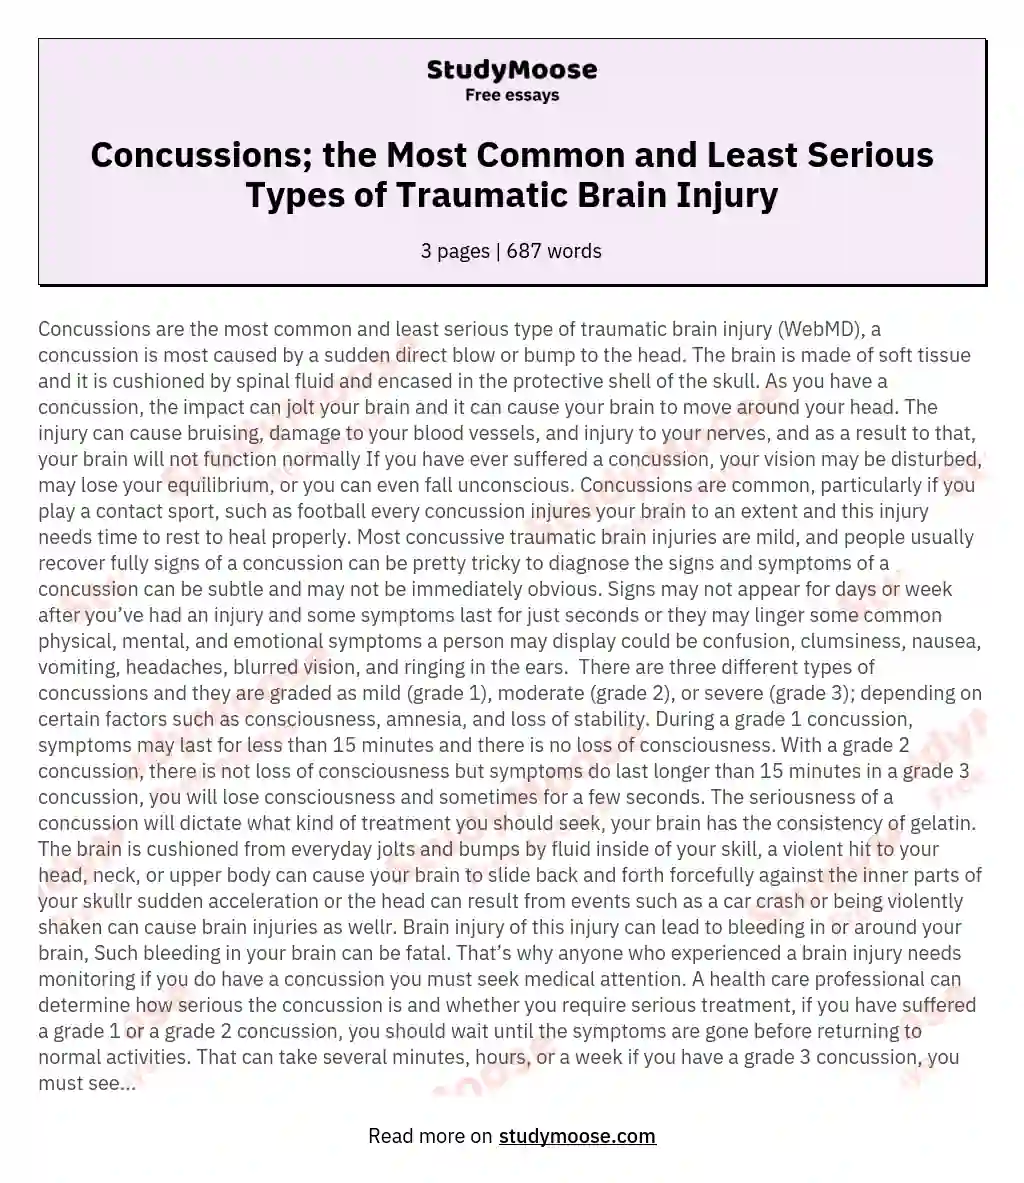 Concussions; the Most Common and Least Serious Types of Traumatic Brain Injury essay